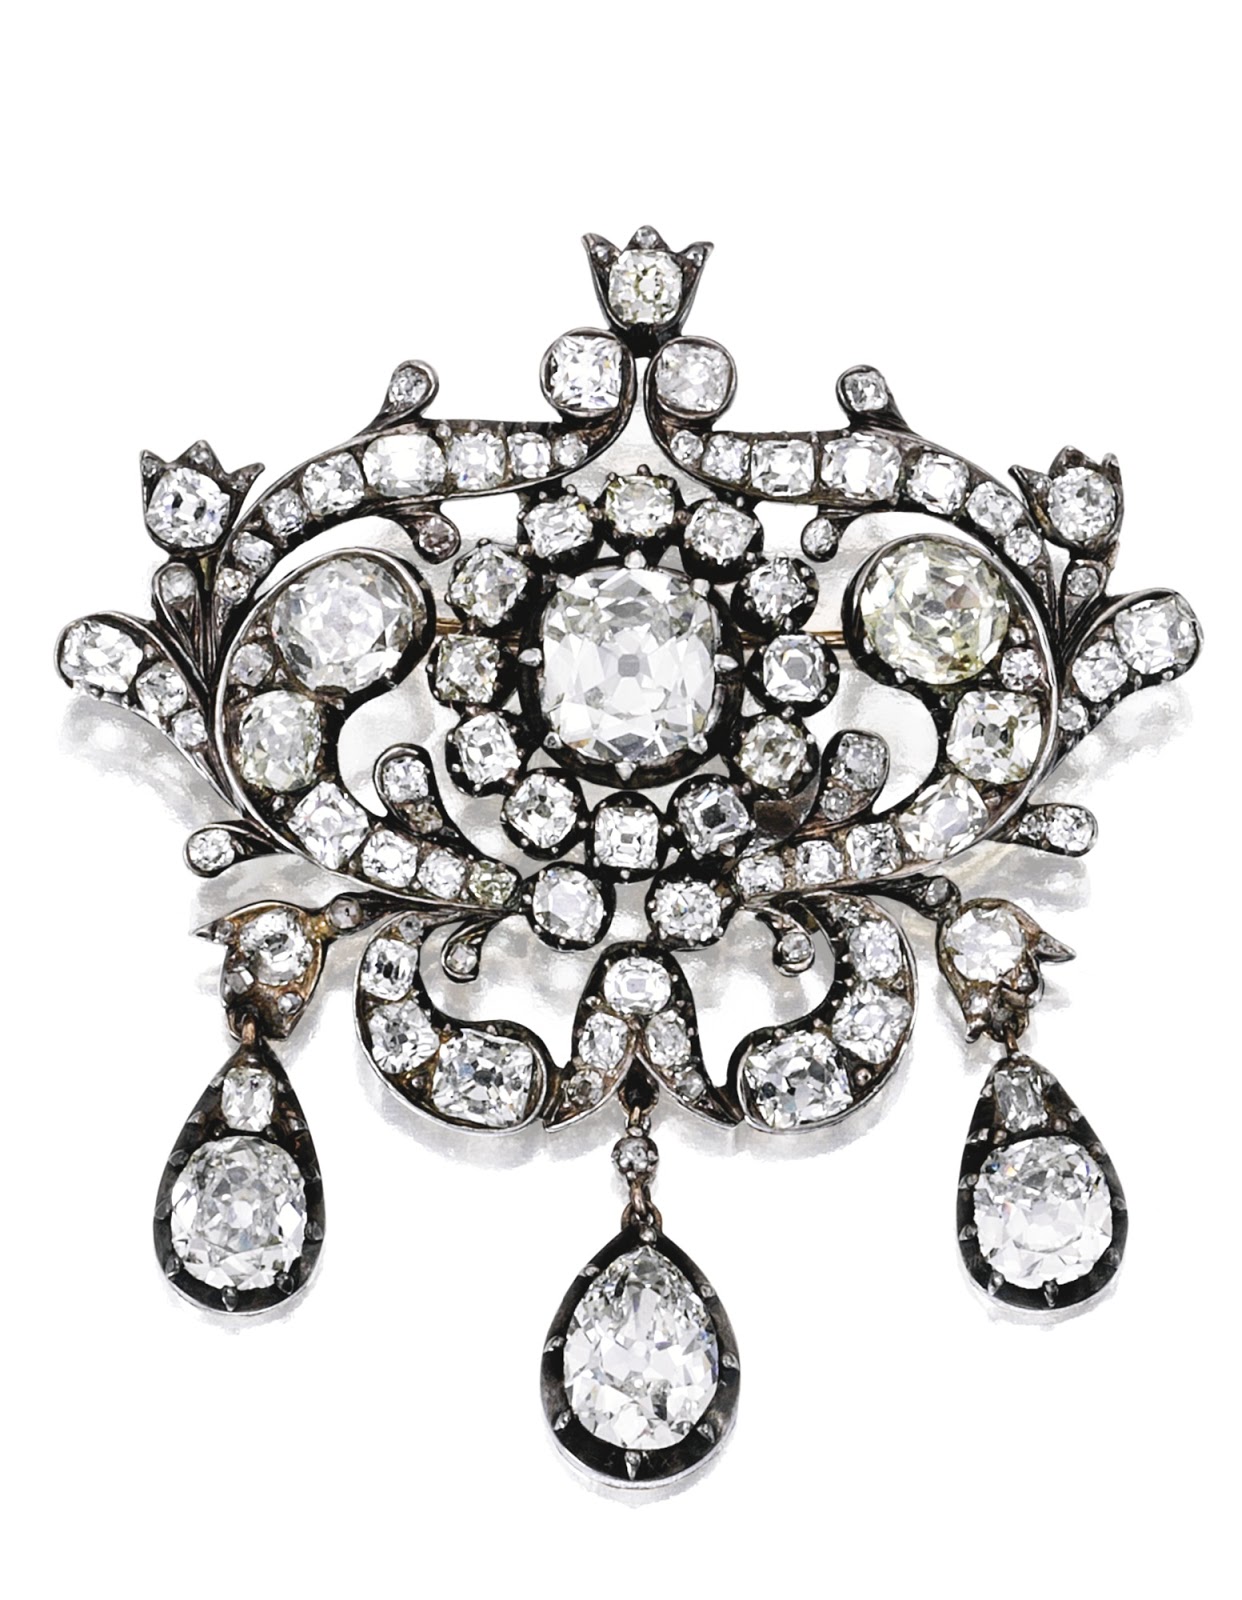 Marie Poutine's Jewels & Royals: Amazing Diamond Brooches